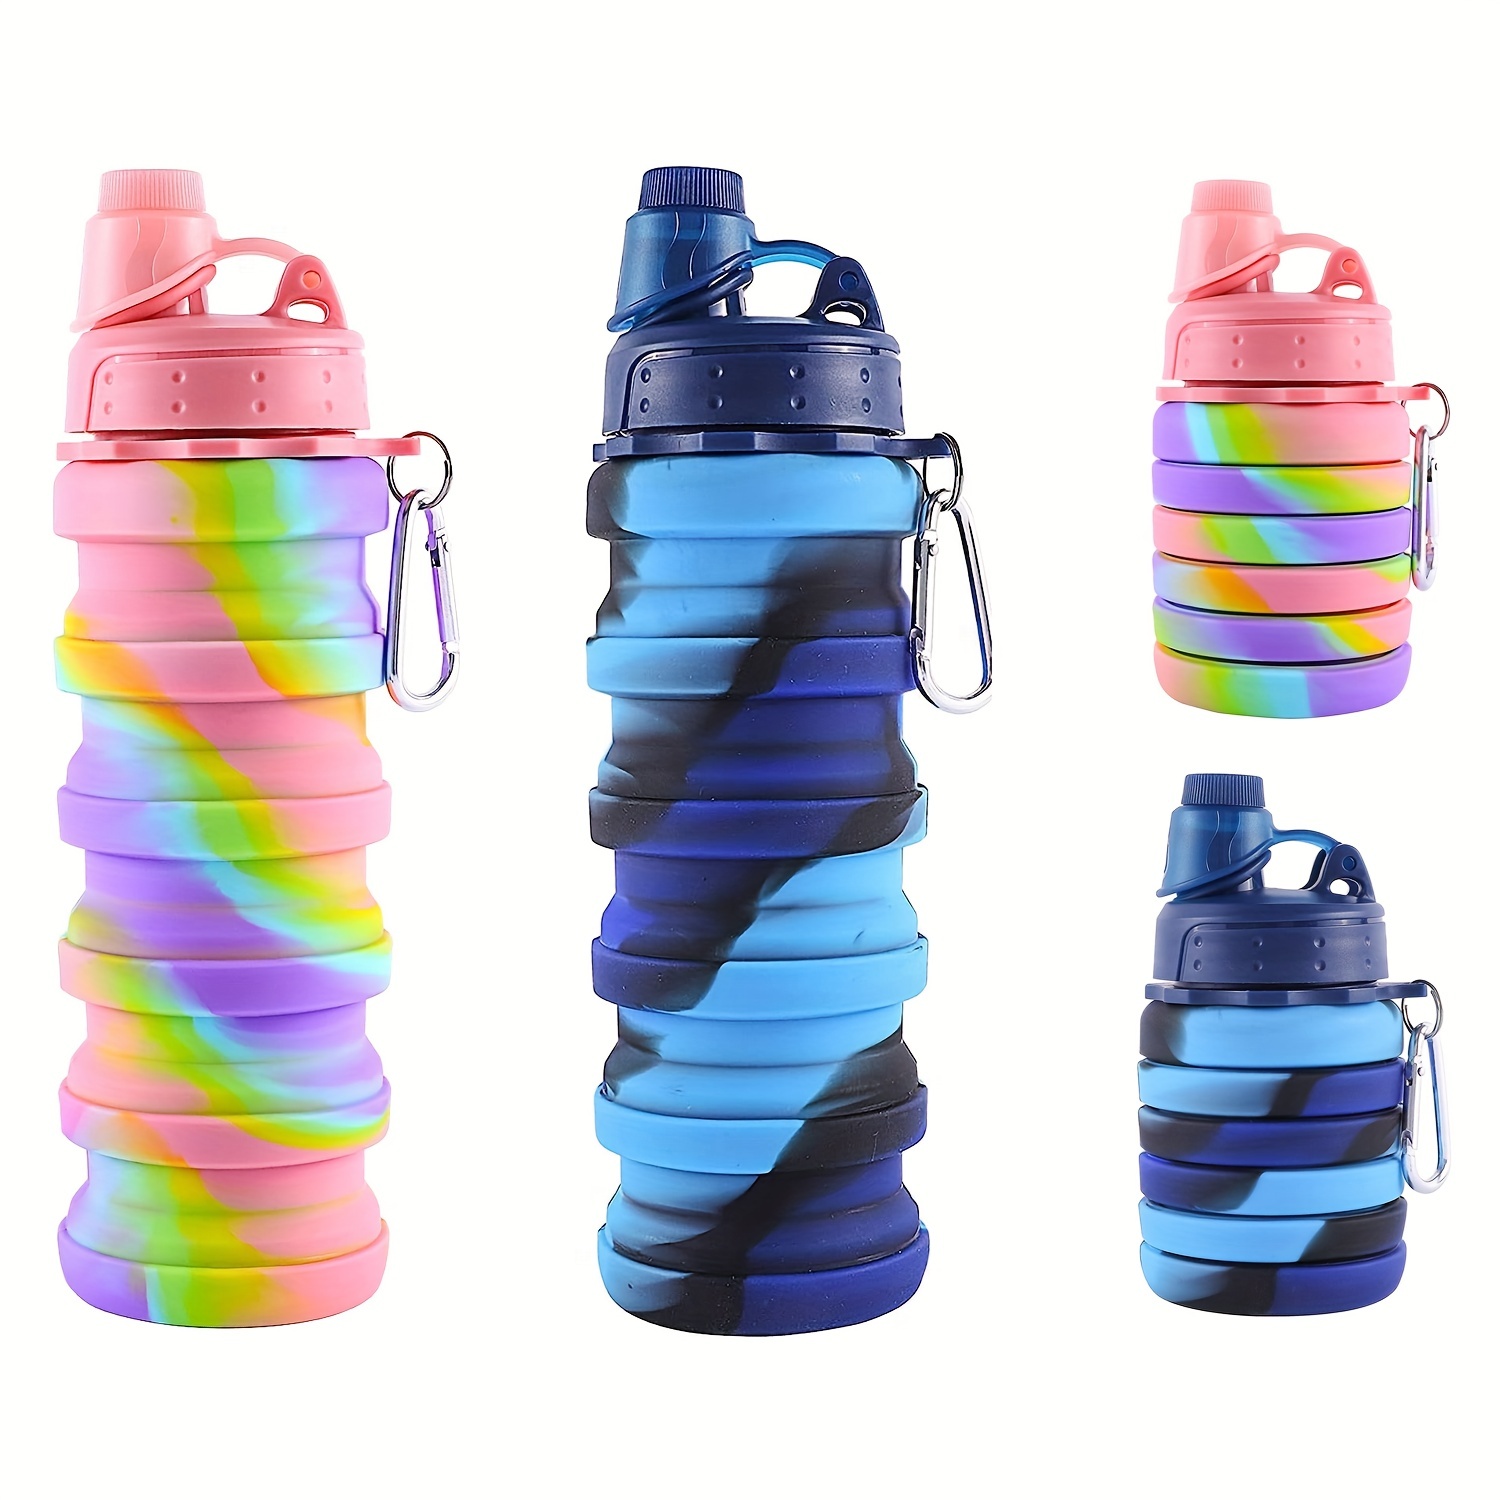 Collapsible Silicone Water Bottle-Collapsible Silicone Water Bottle-  Leakproof, BPA Free, FDA Approved, Travel Accessories